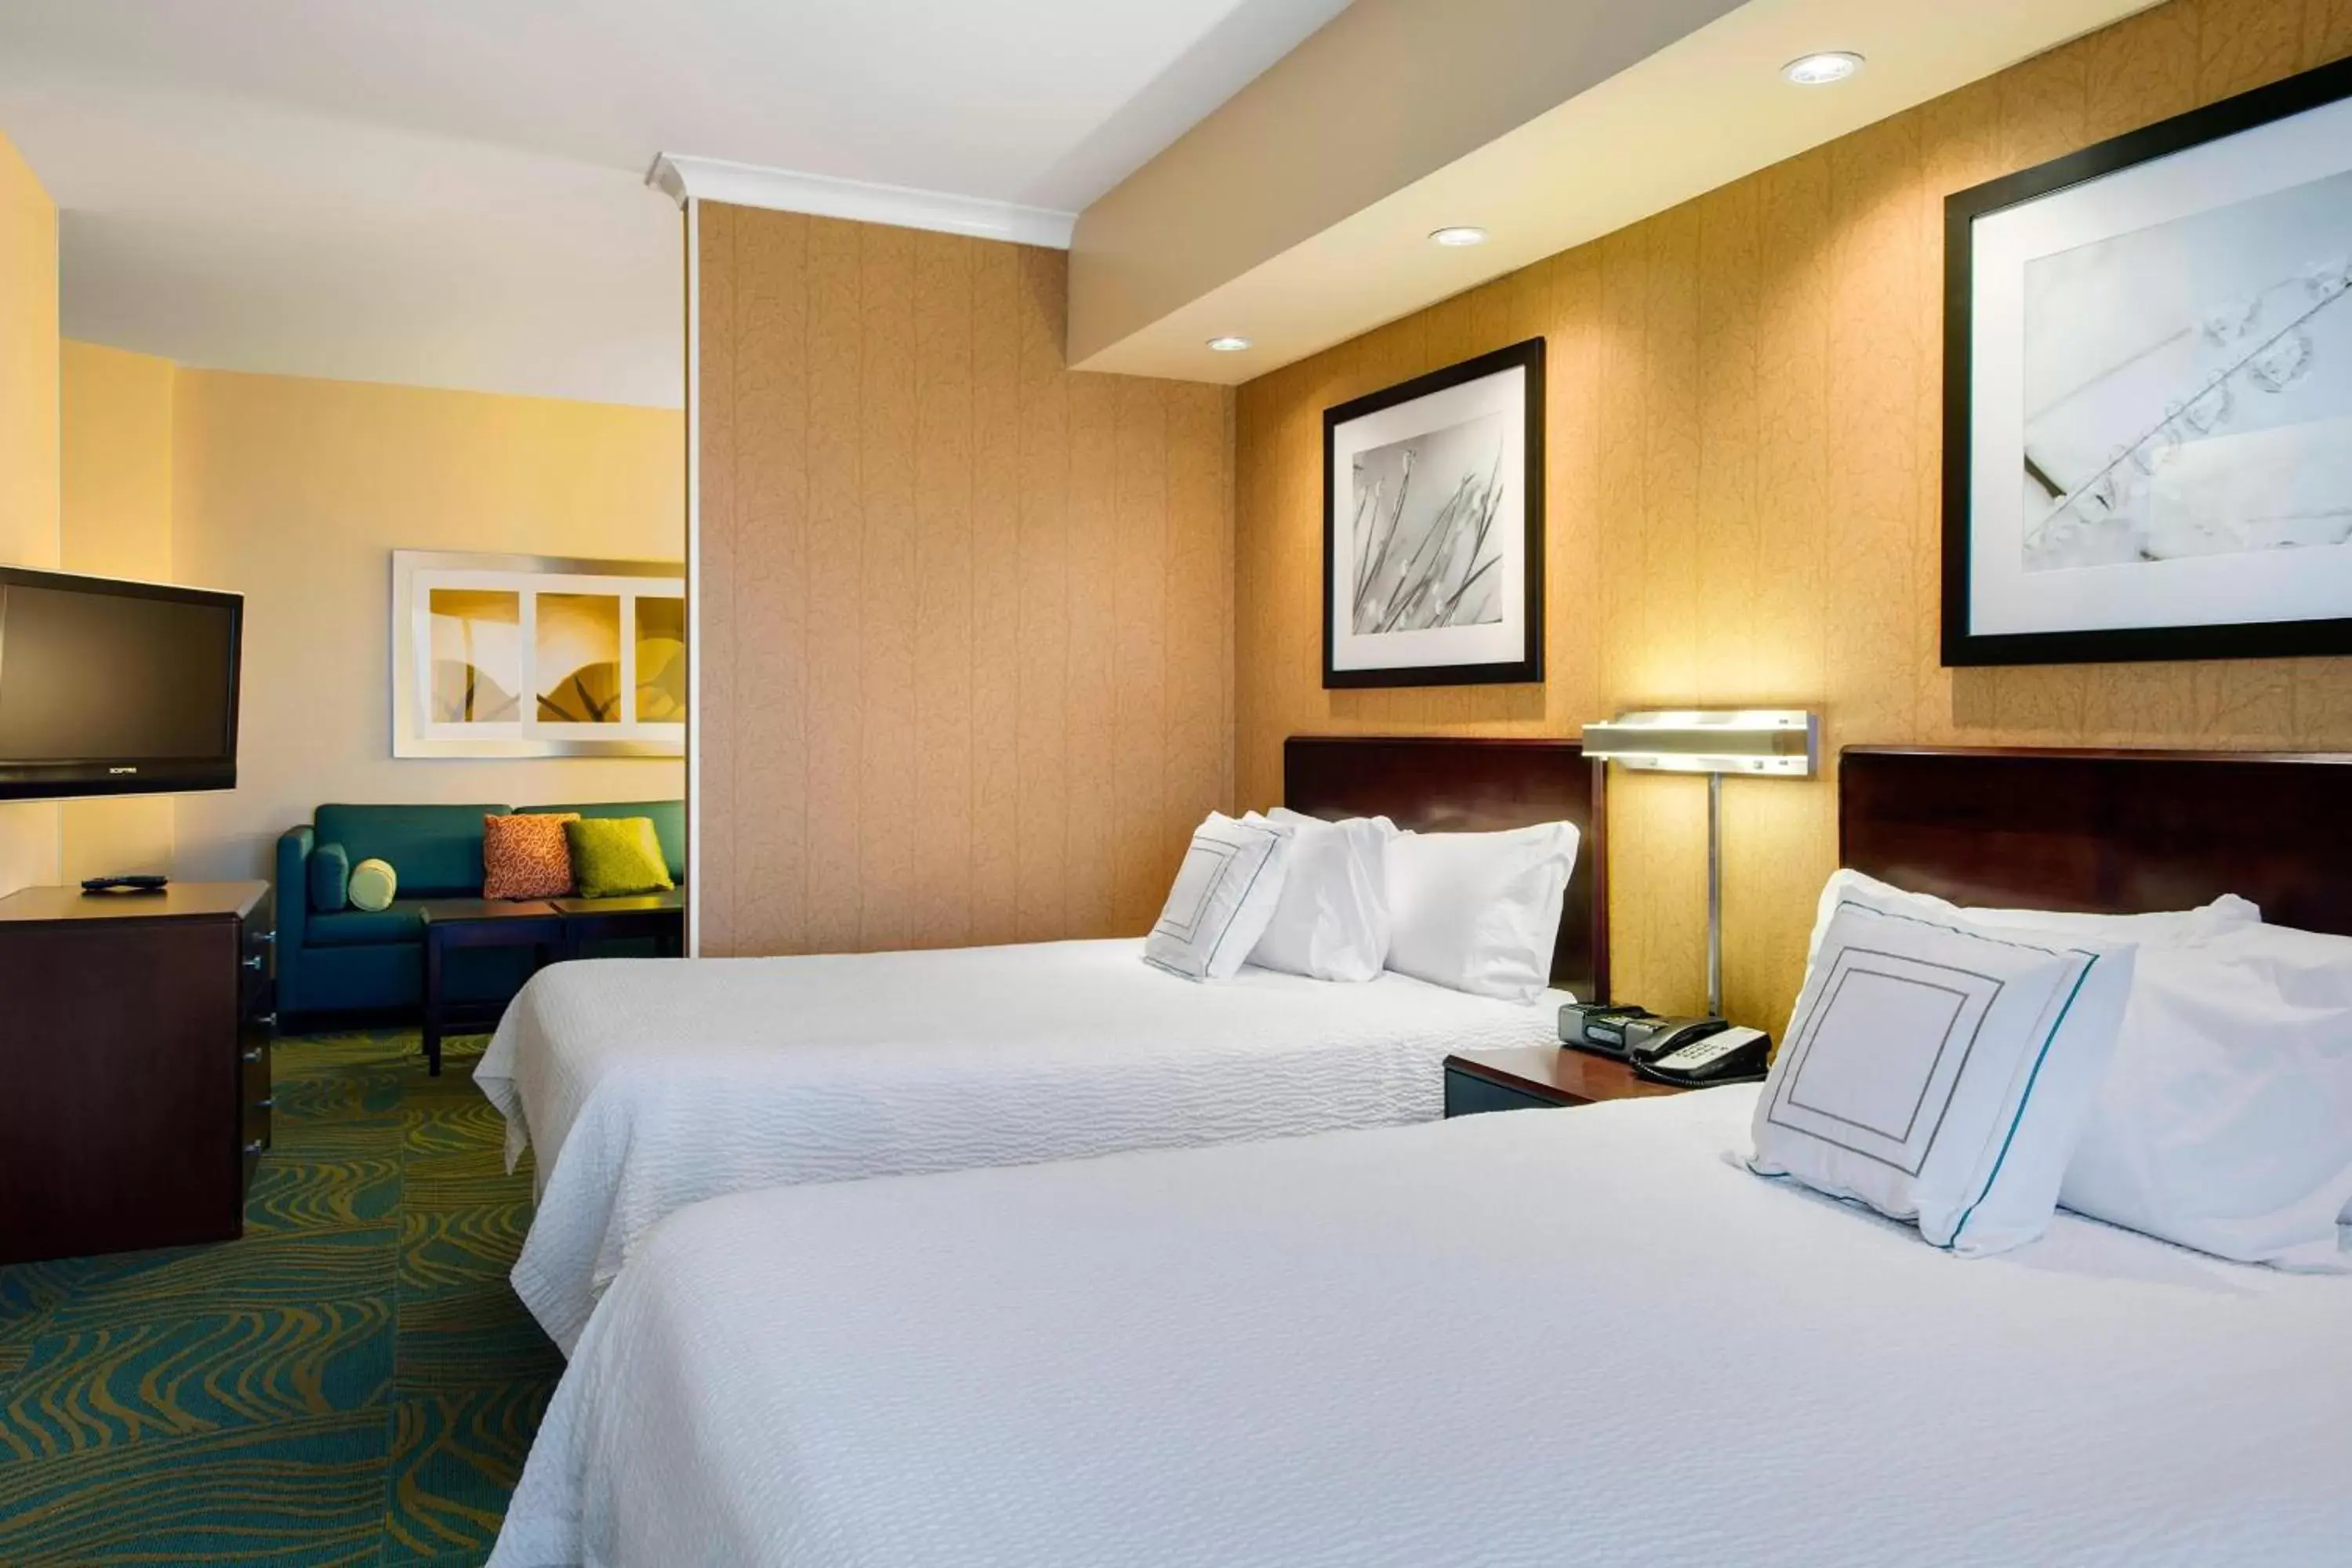 Bedroom, Bed in SpringHill Suites by Marriott Omaha East, Council Bluffs, IA